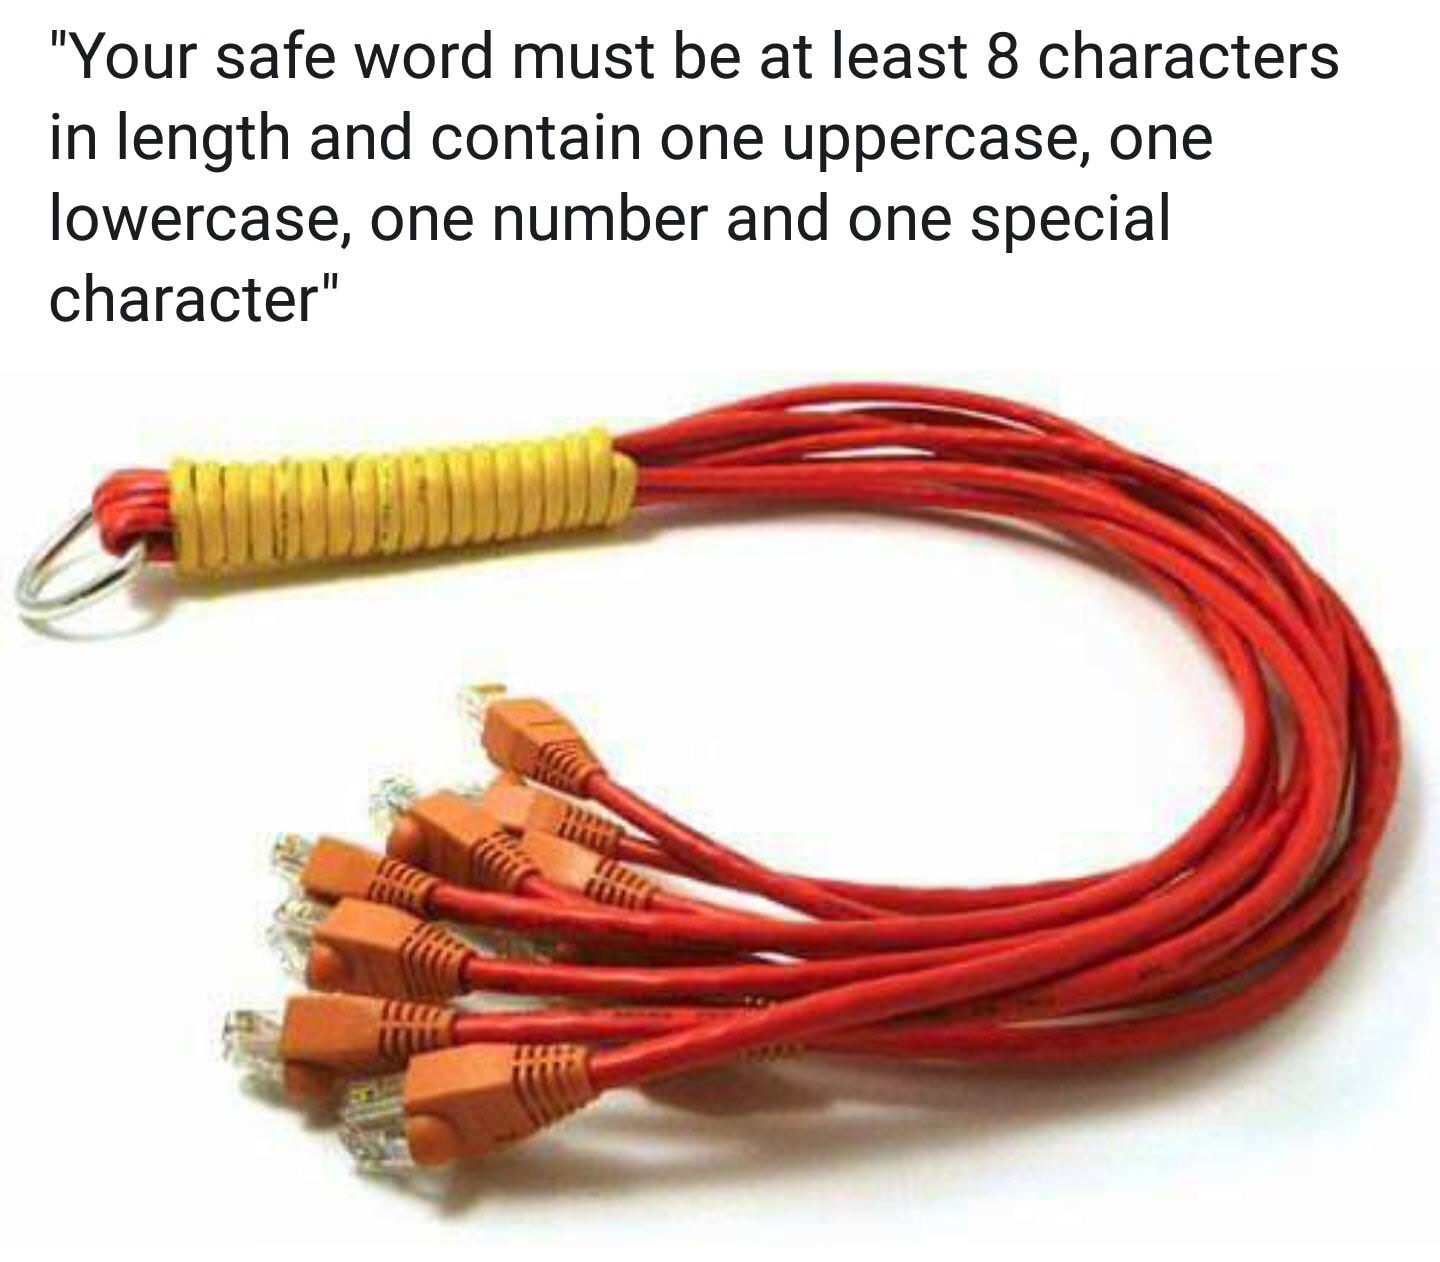 your safe word must be at least 8 characters - "Your safe word must be at least 8 characters in length and contain one uppercase, one lowercase, one number and one special character"